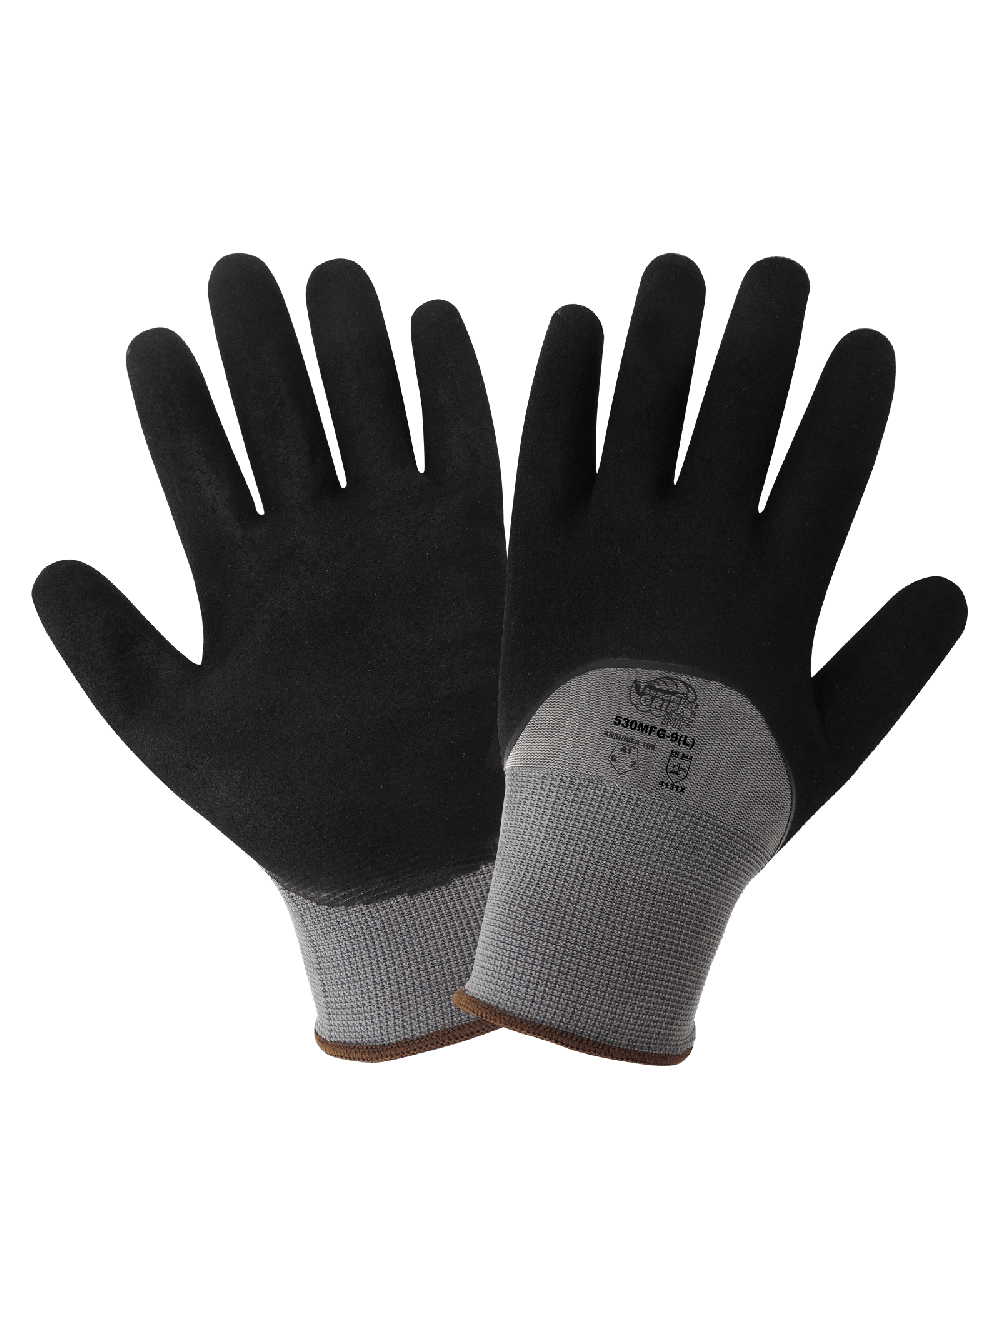 Global Glove Gripster Etched Rubber Gloves - Medium - 300